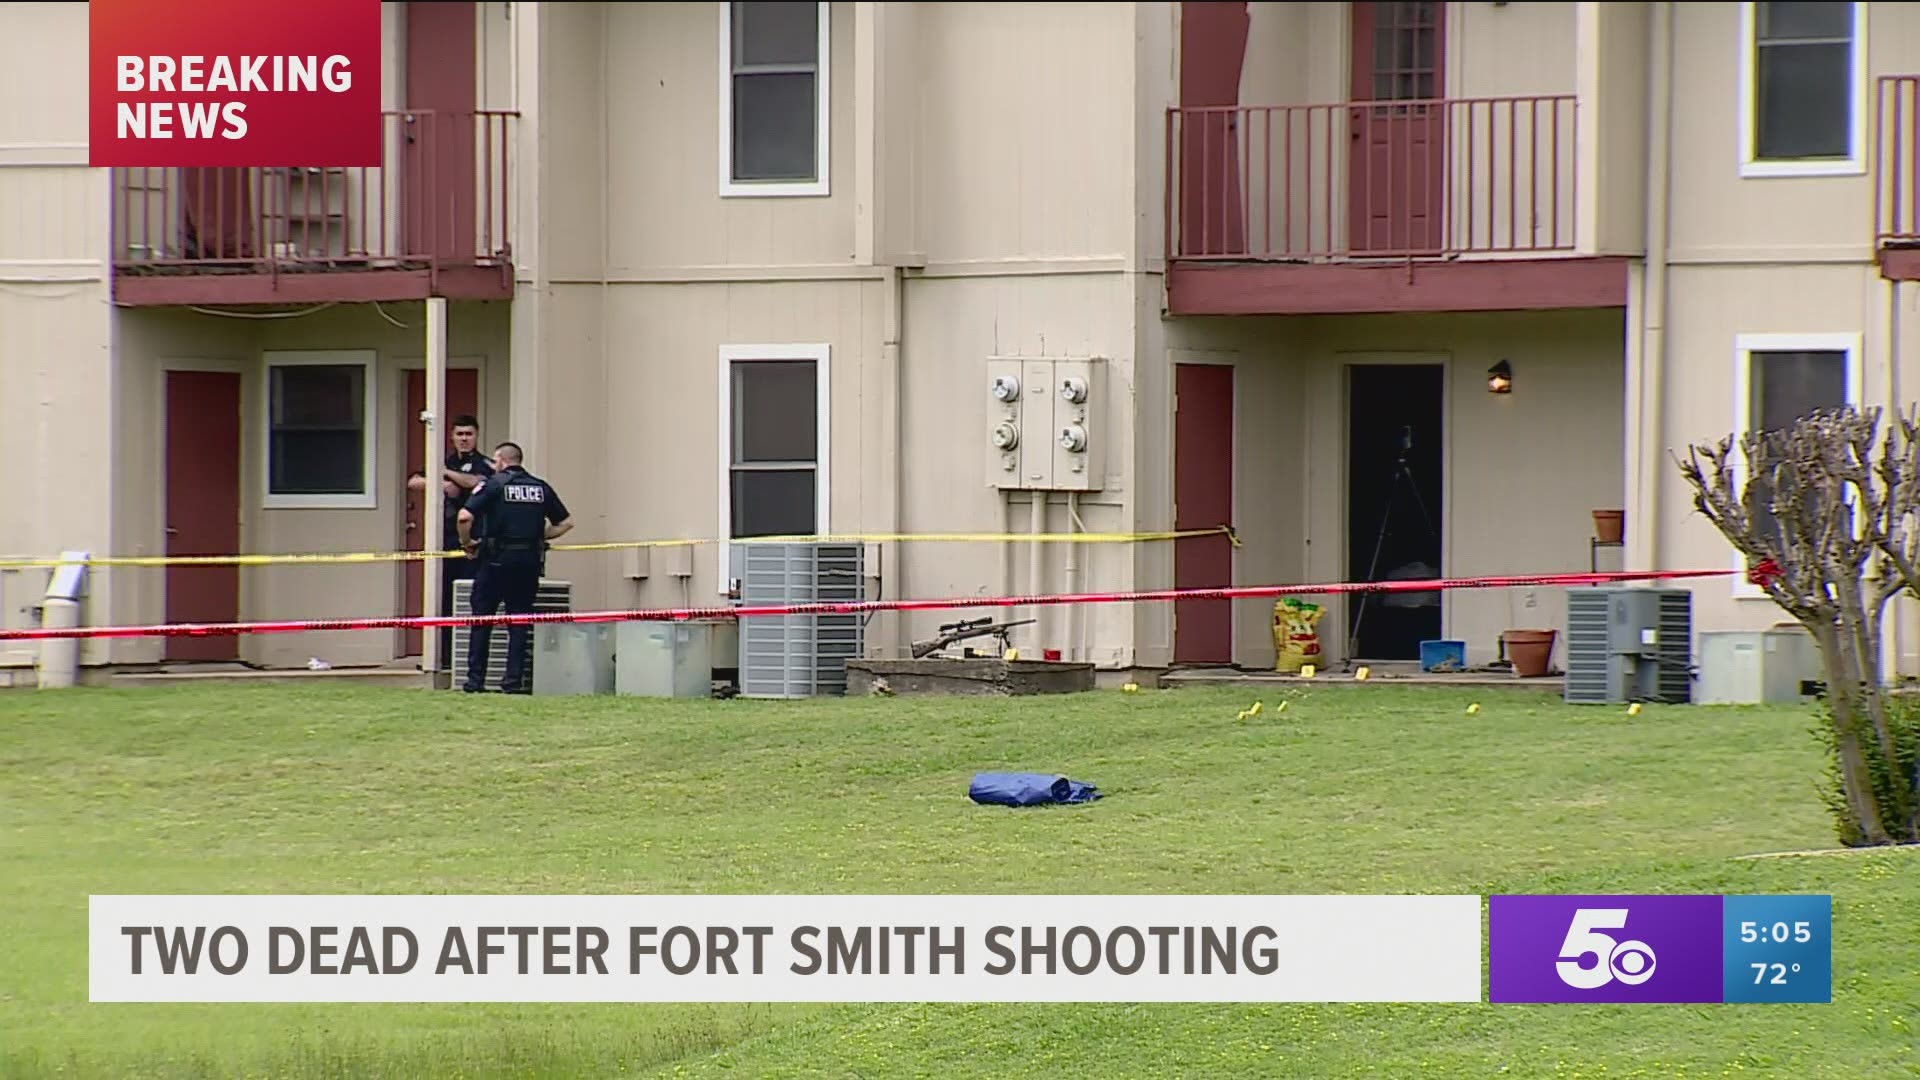 Fort Smith Police are investigating a shooting that took place at an apartment complex in the 3500 block of S. 74th St.